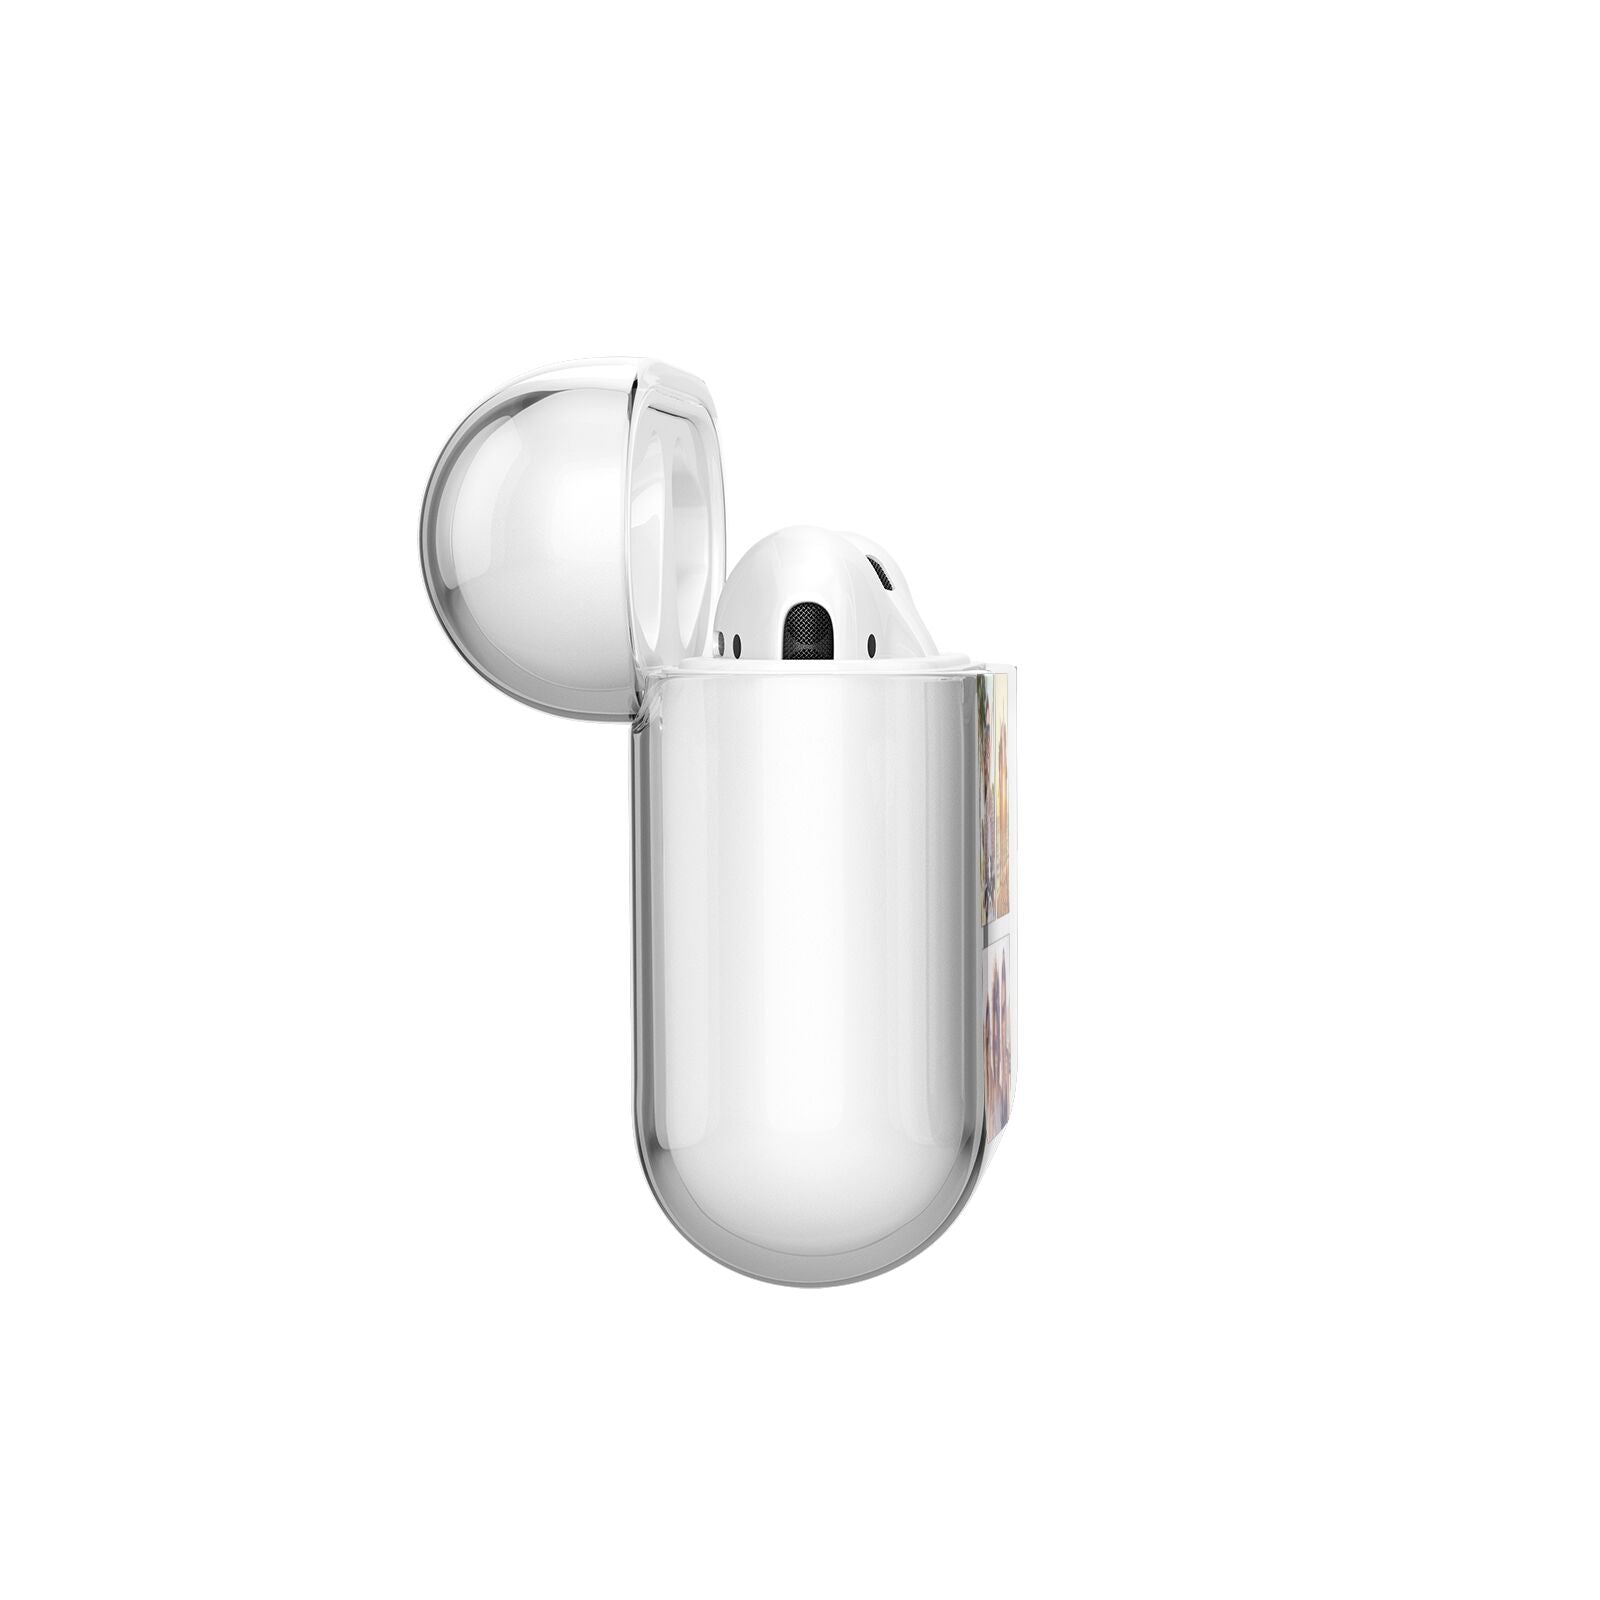 Three Image Horizontal Collage AirPods Case Side Angle